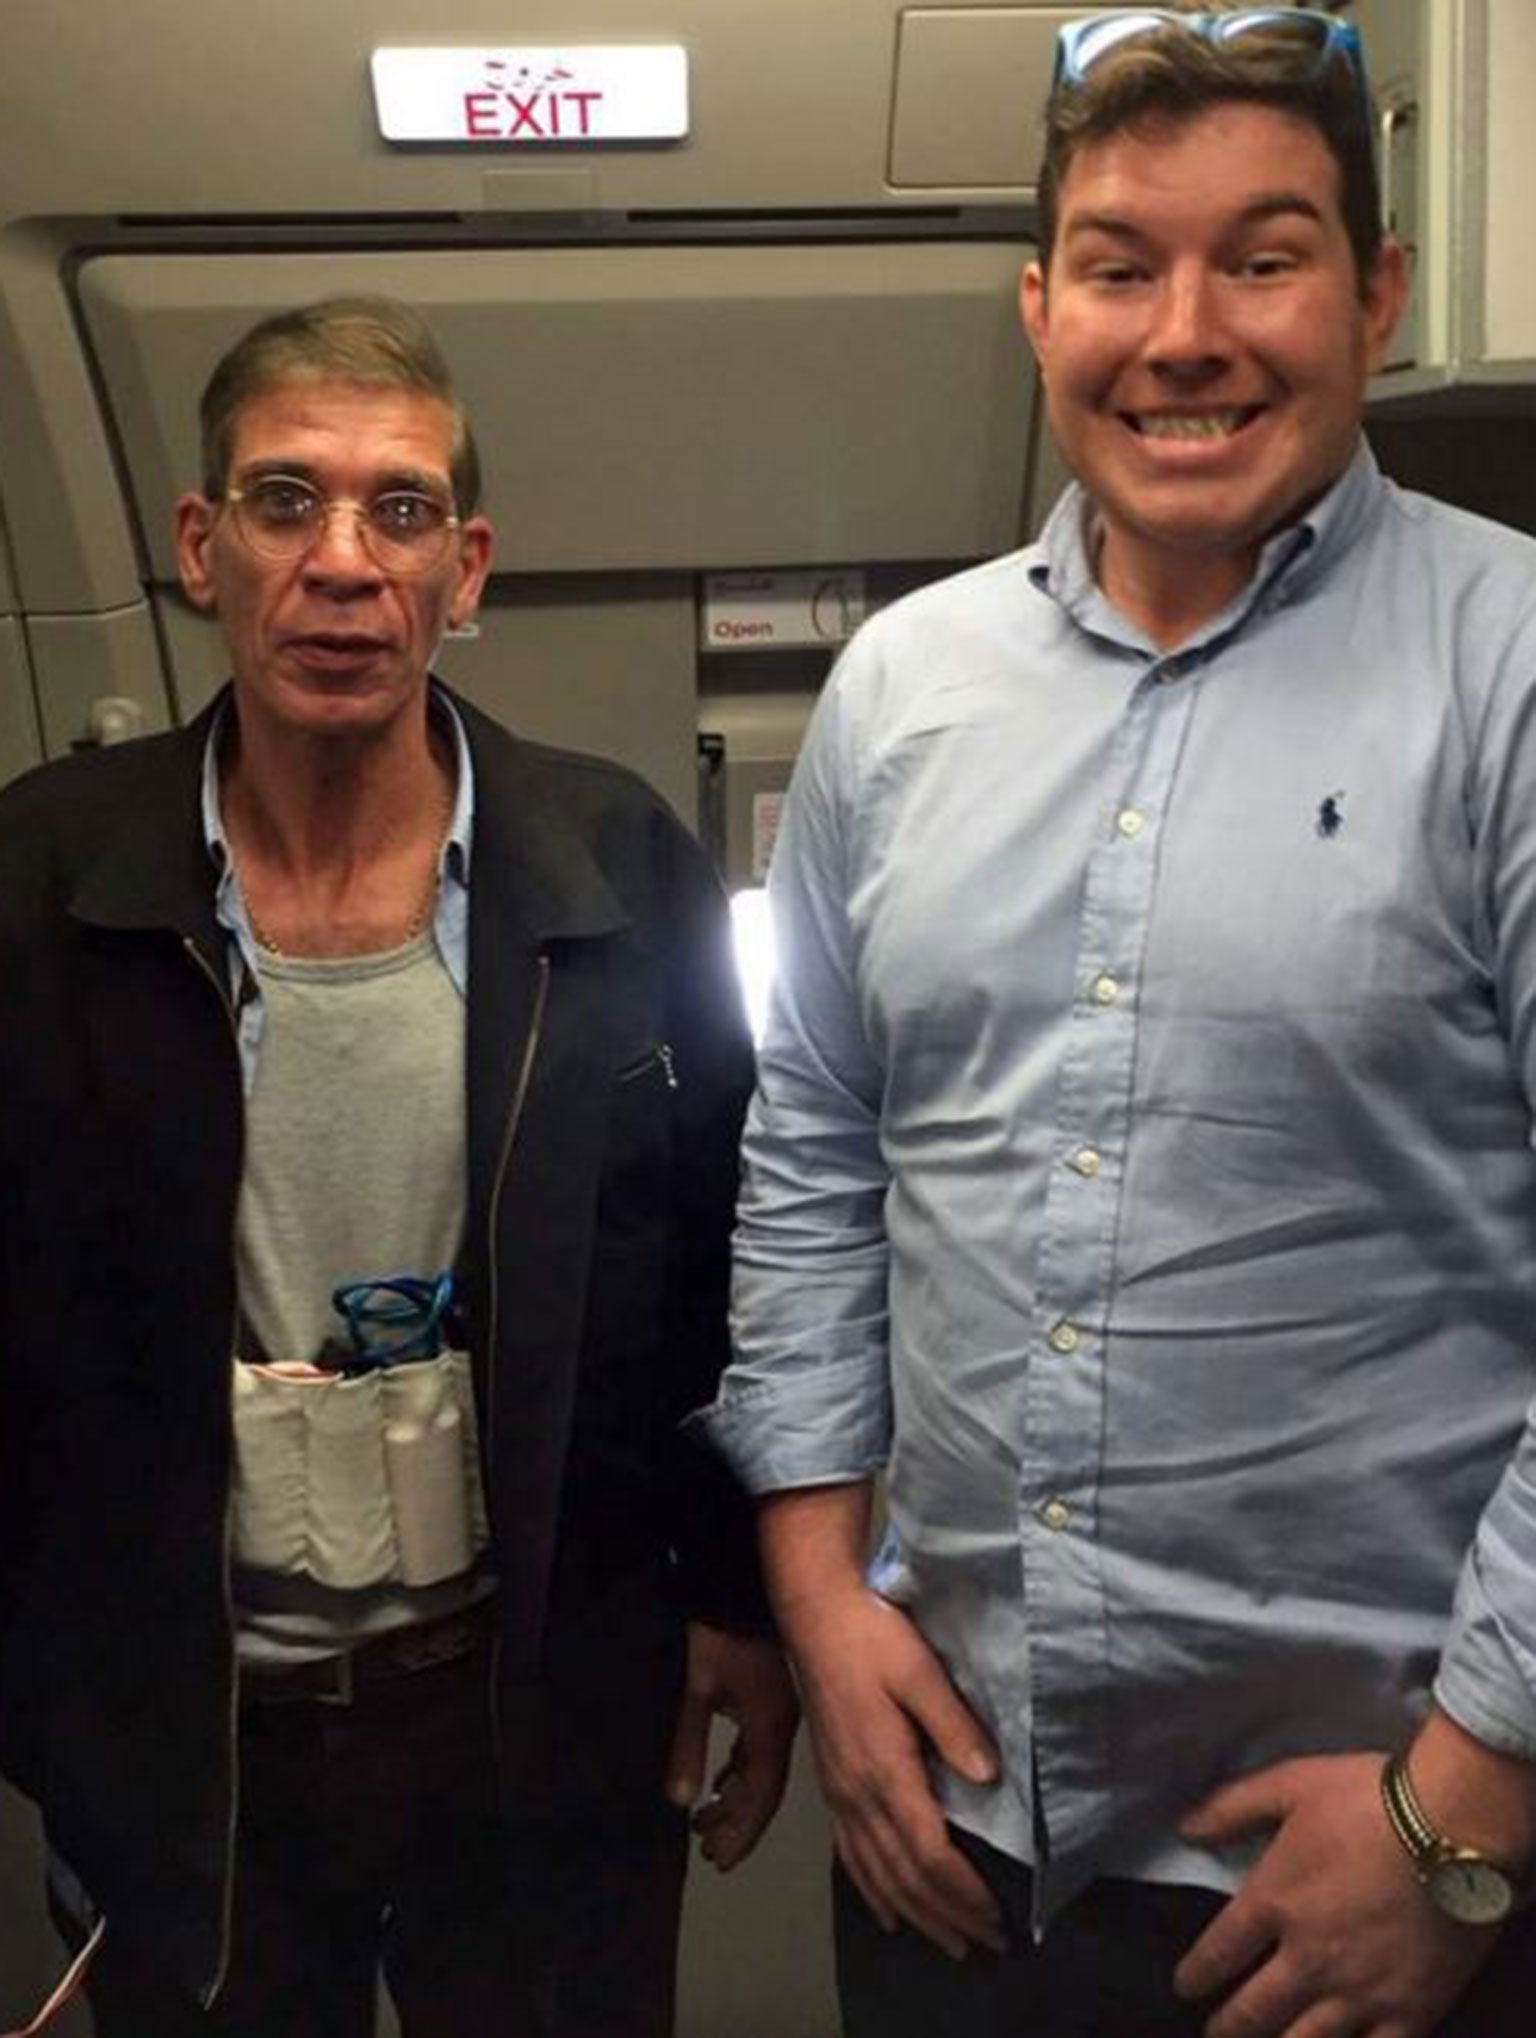 Ben Innes sent friends this image of himself with the hijacker on his mobile phone